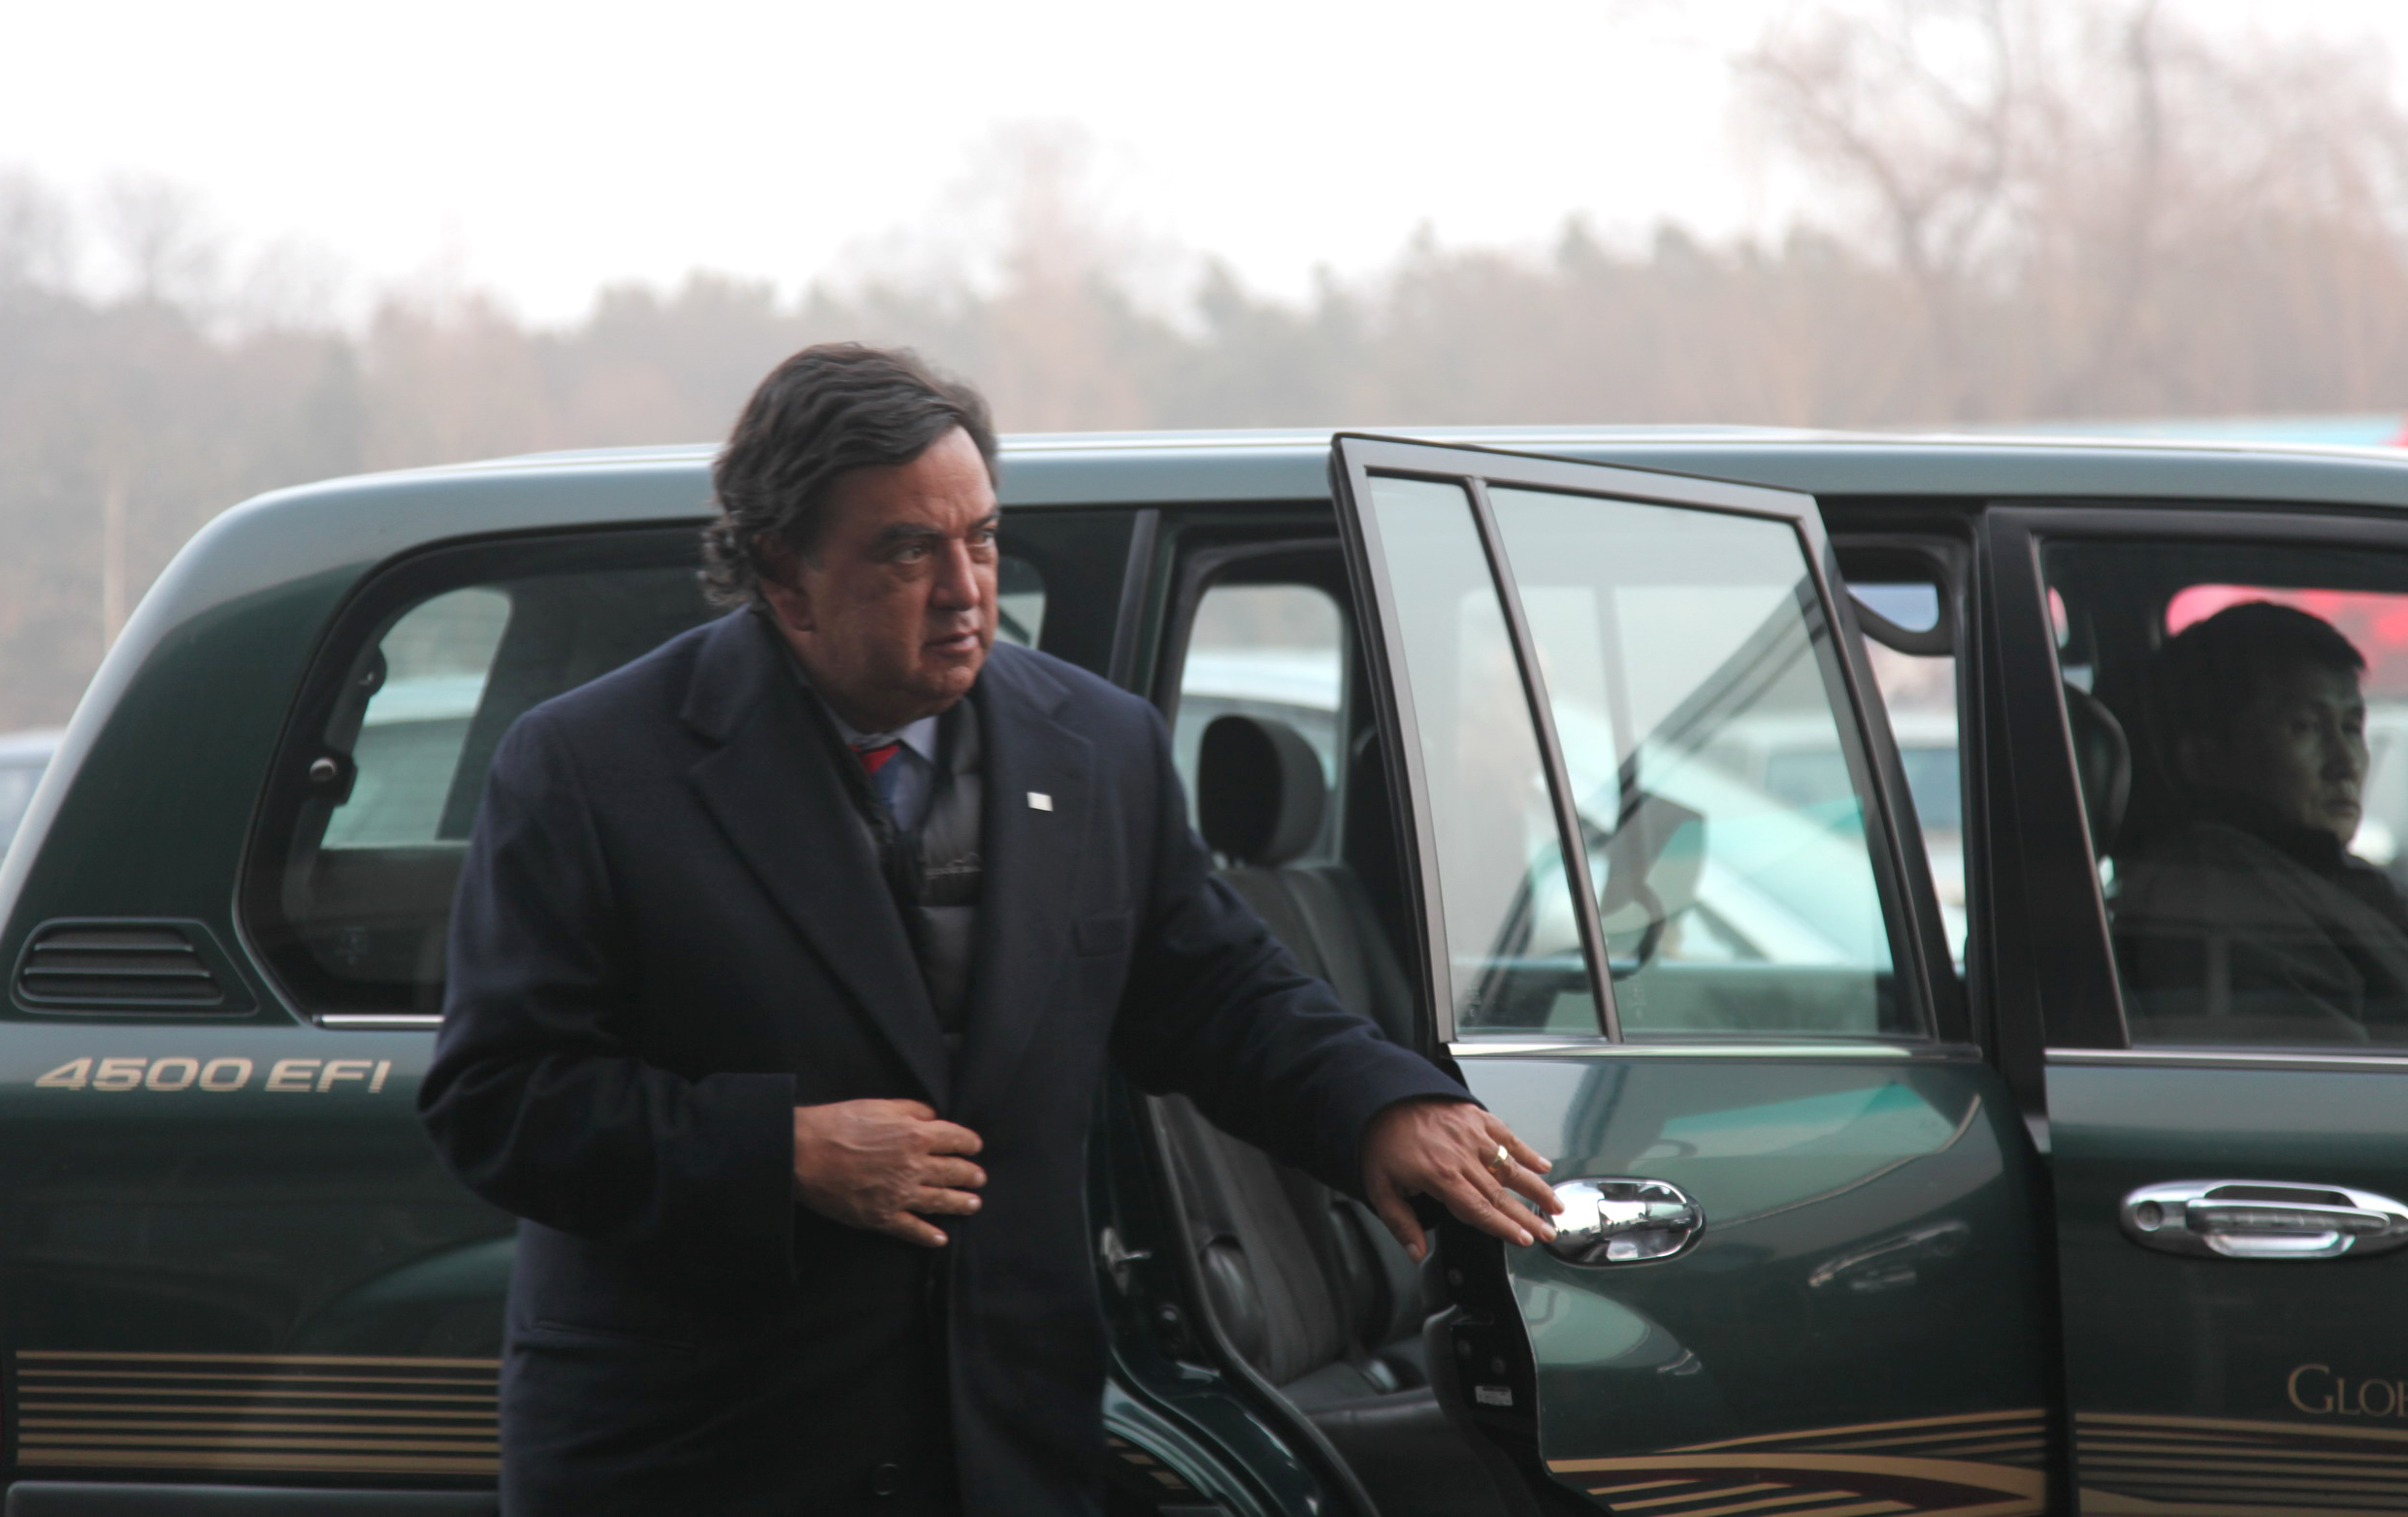 PHOTO: Former New Mexico Gov. Bill Richardson arrives at Pyongyang international airport in Pyongyang, capital of North Korea, on Dec. 20, 2010. 